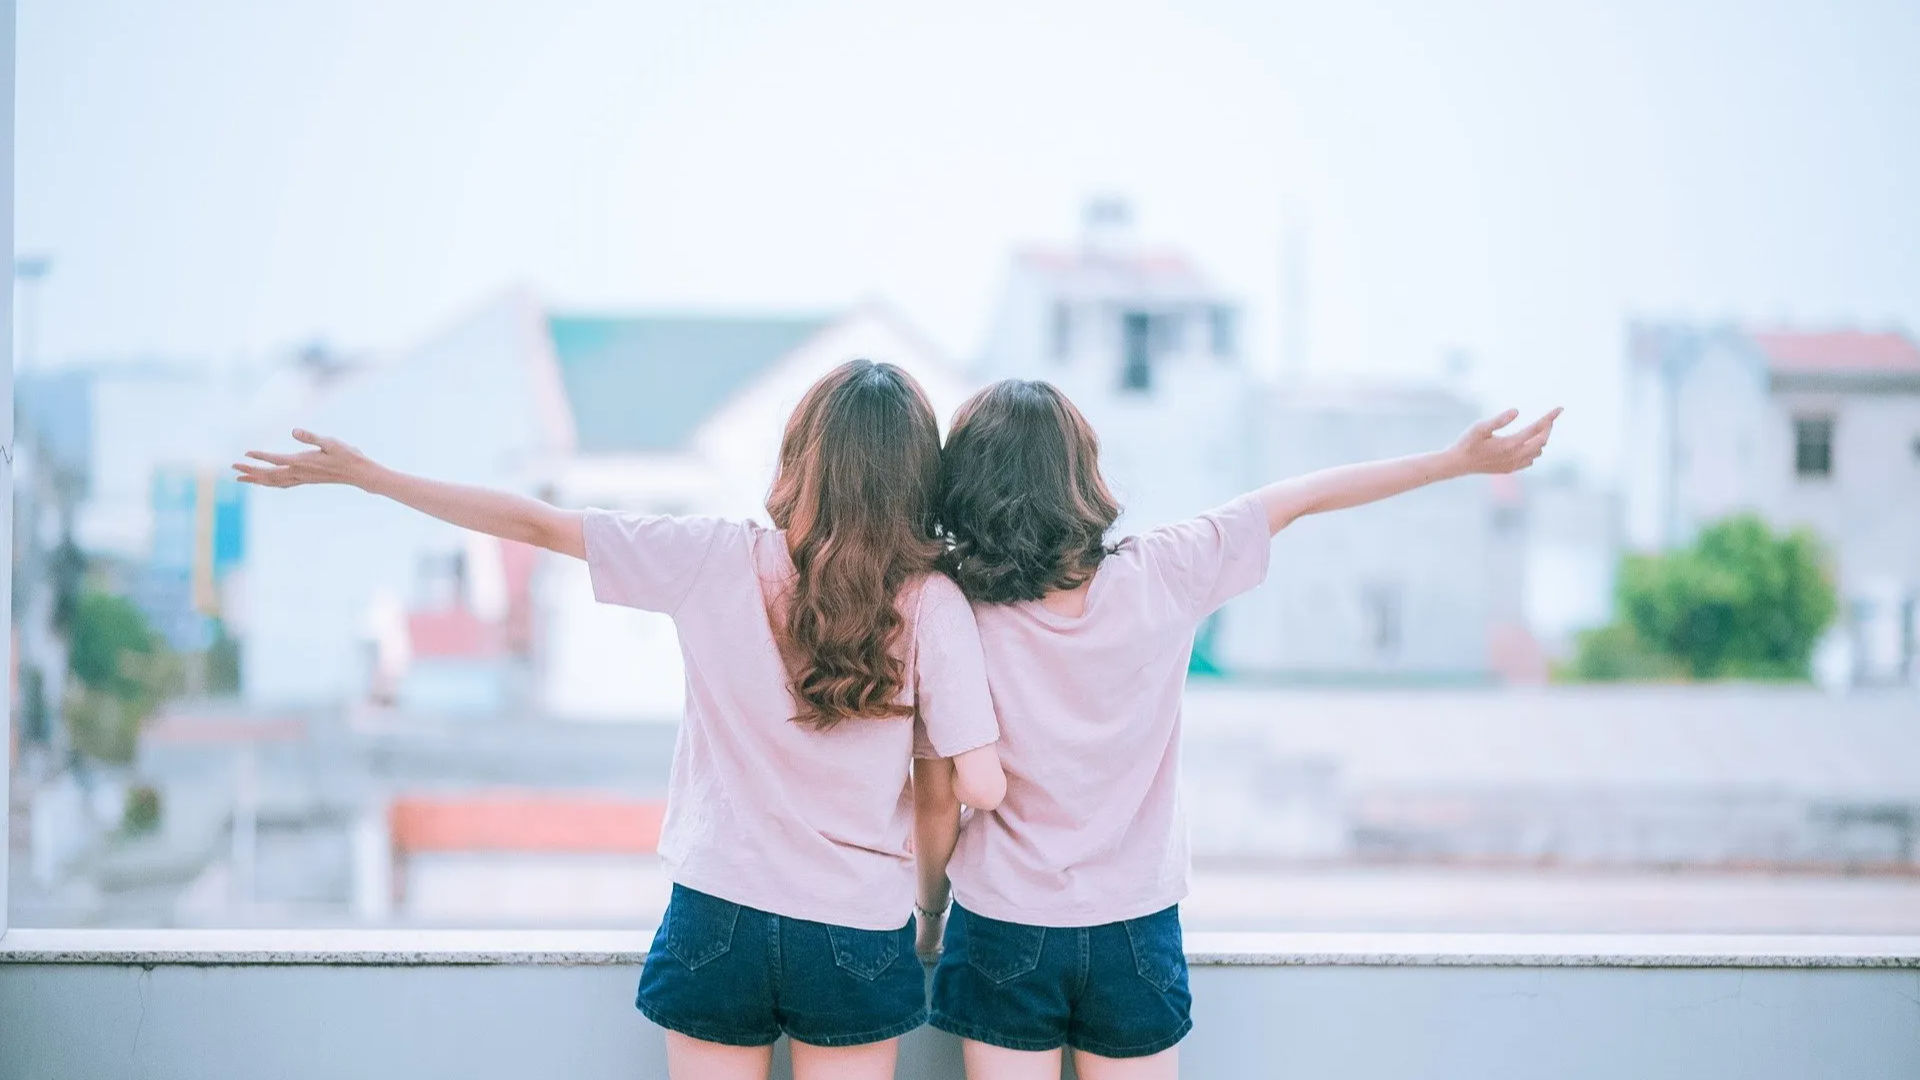 Friendship Day: Things not to say when you catch up with an old friend